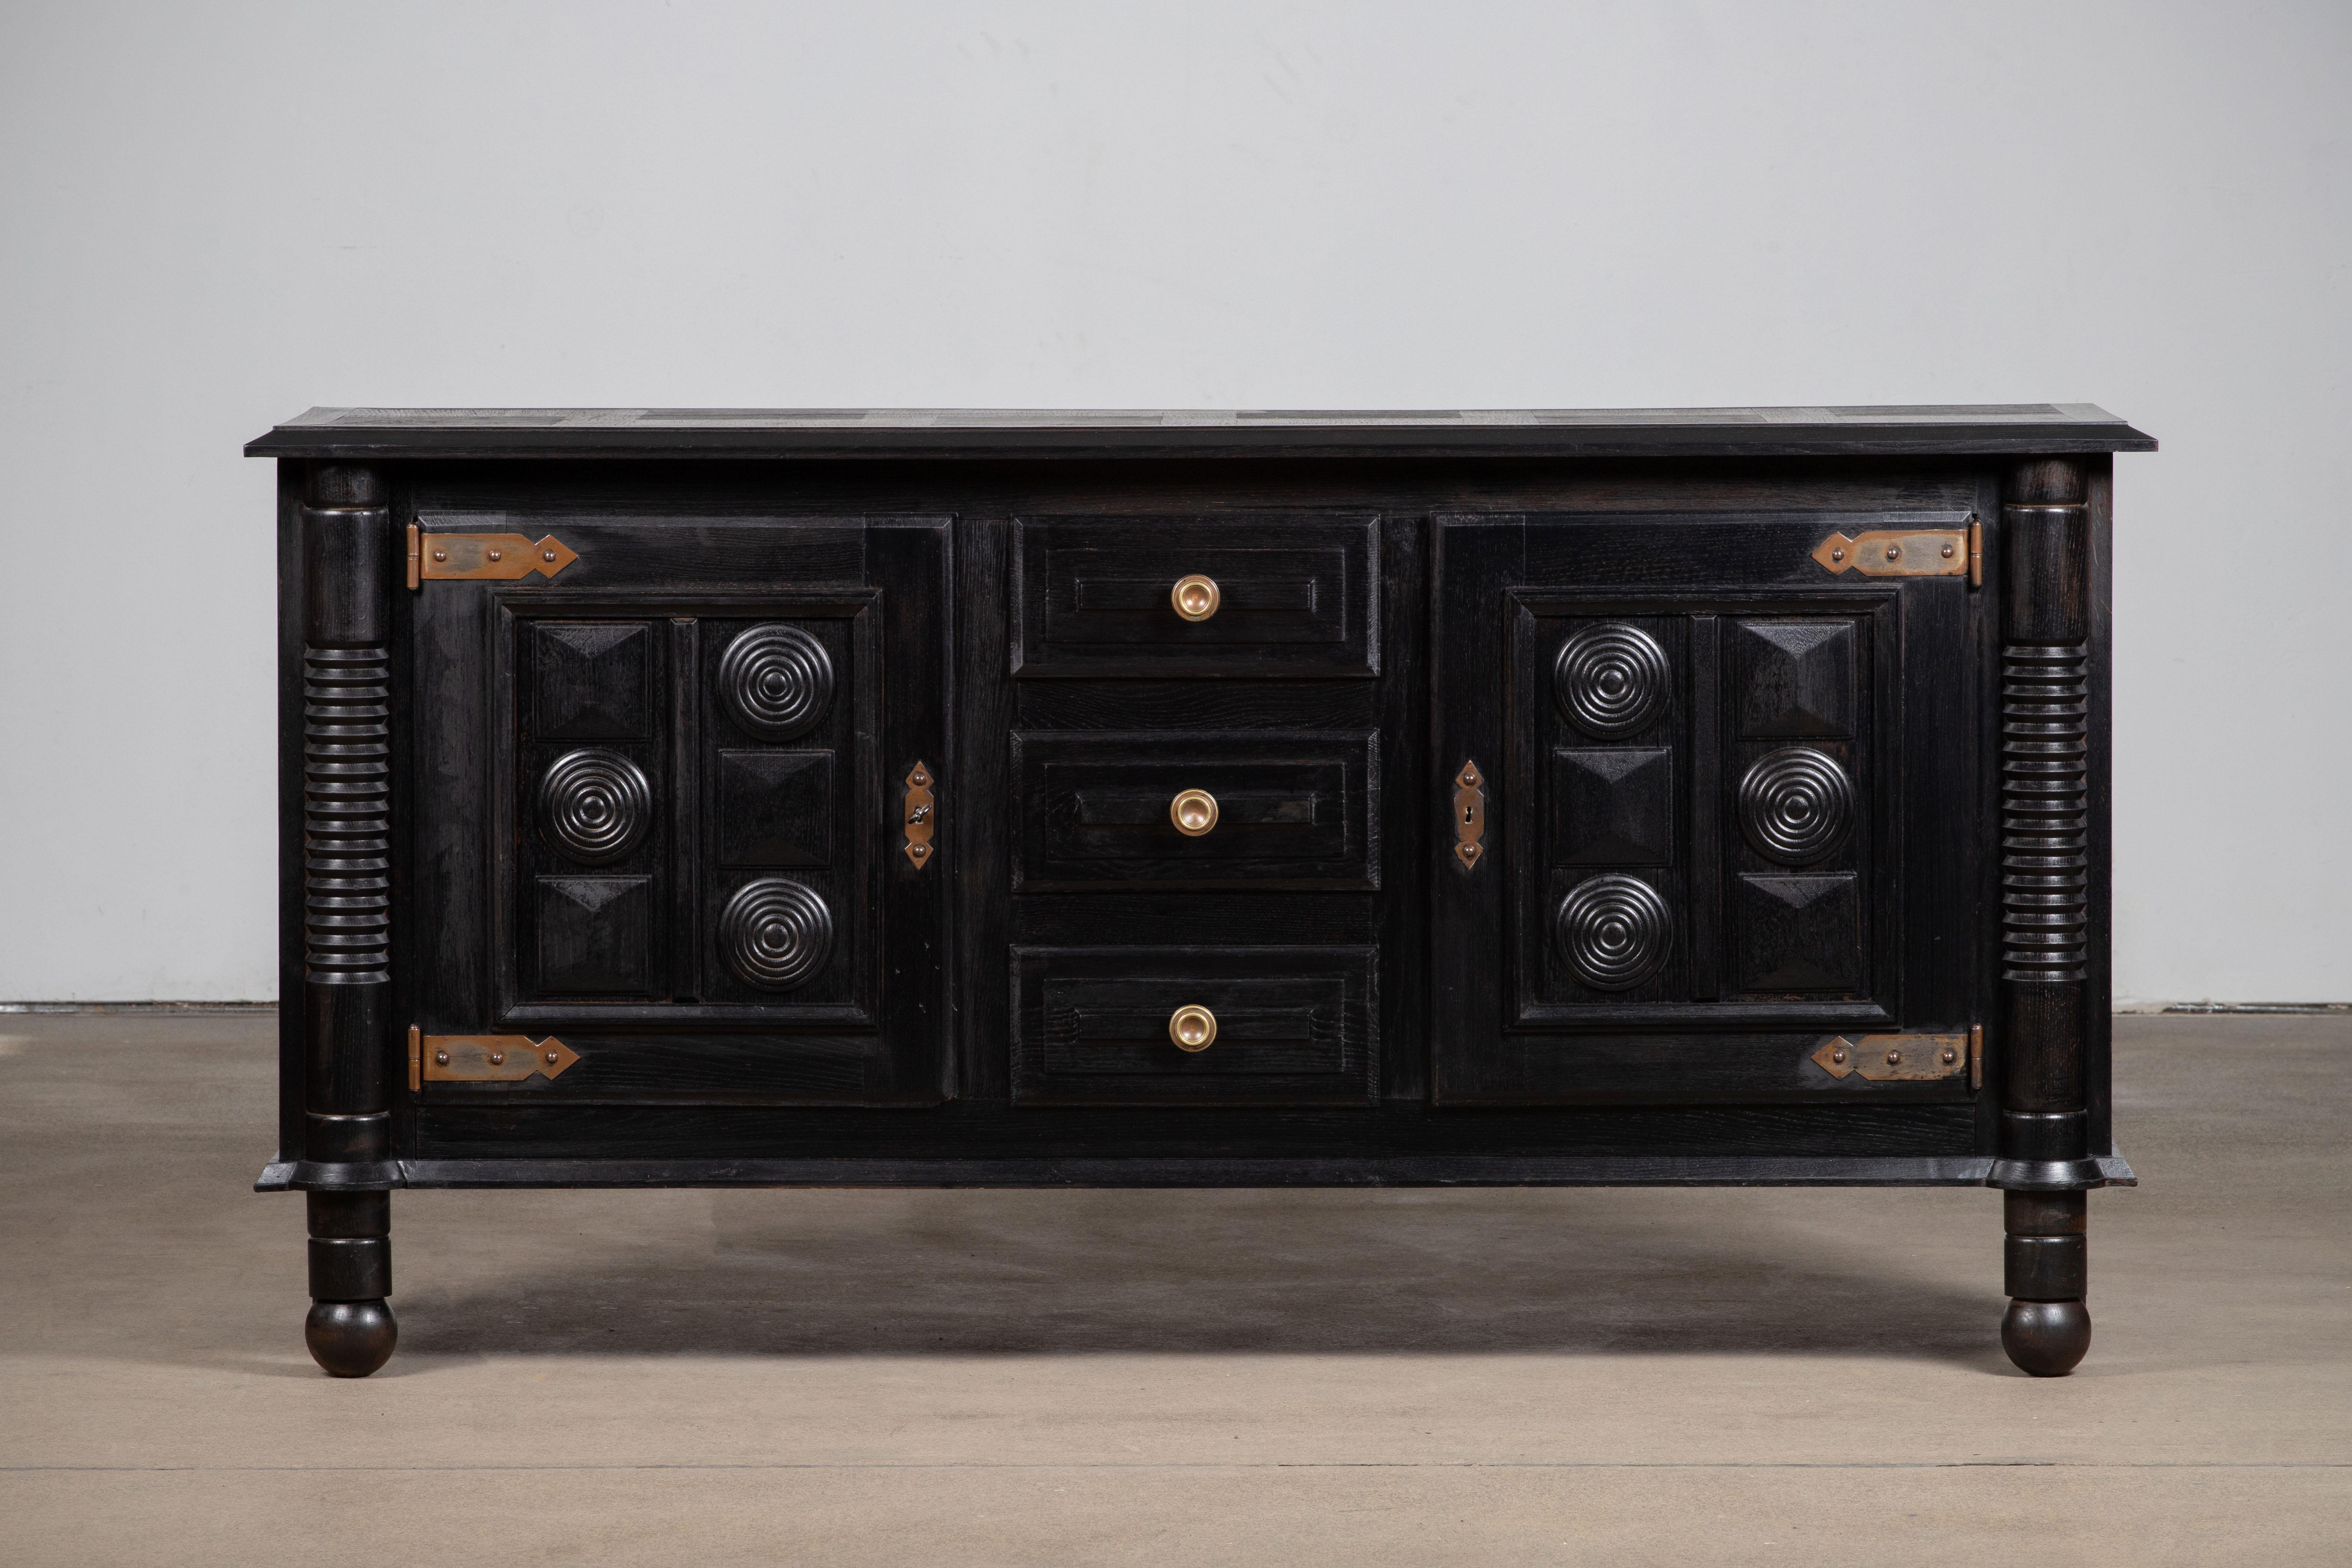 A large sideboard/credenza in solid ebonized oak attributed to Charles Dudouyt, France, c1940s.
Consists of 3 central drawers and two storage compartments. 
Original brass detailing and graphic design doors make this piece really stand out.
The